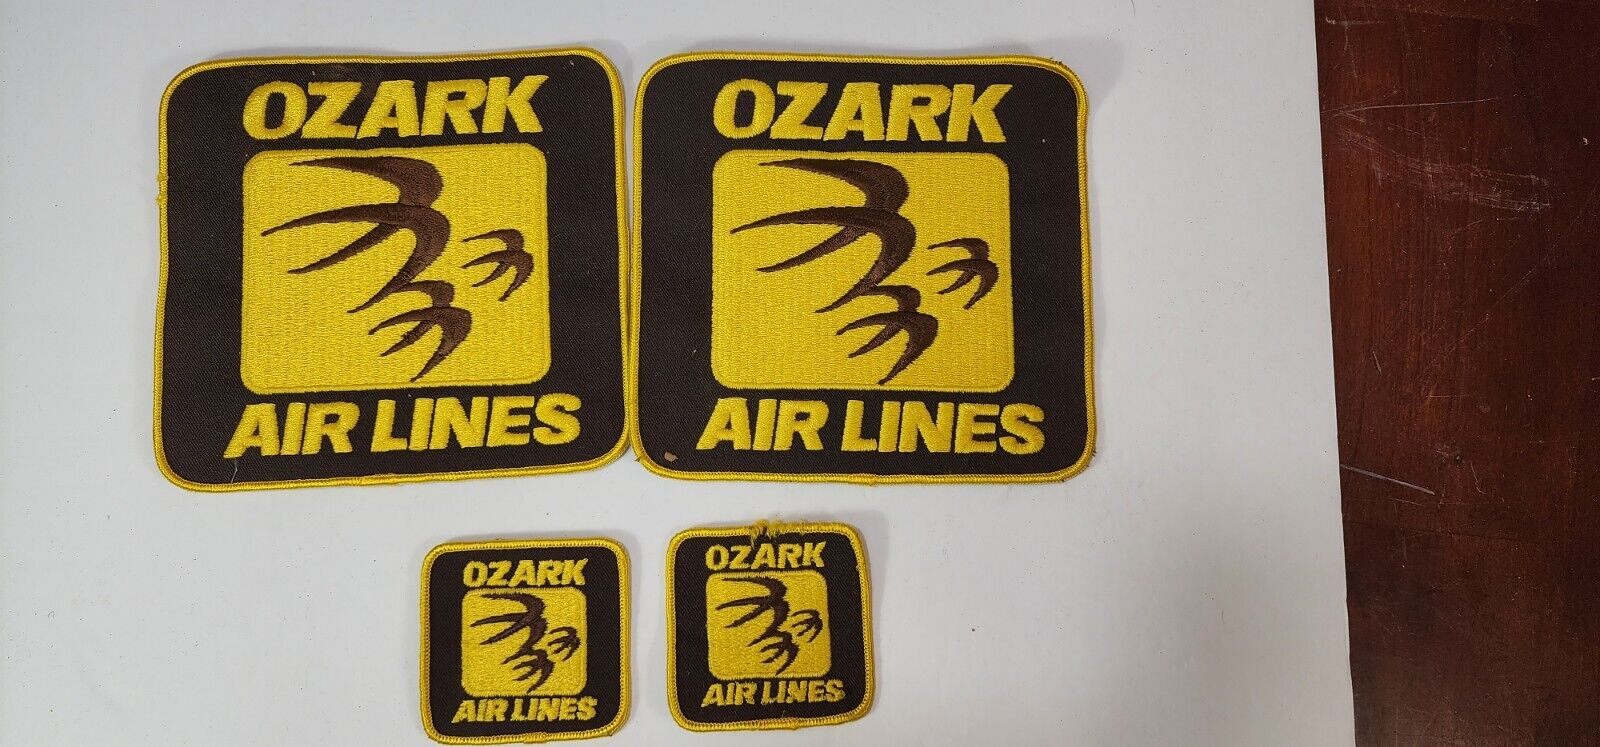 4 Ozark Air Lines Embroidered Patch 2 6 Inches And 2 2.5 Inches Patches 